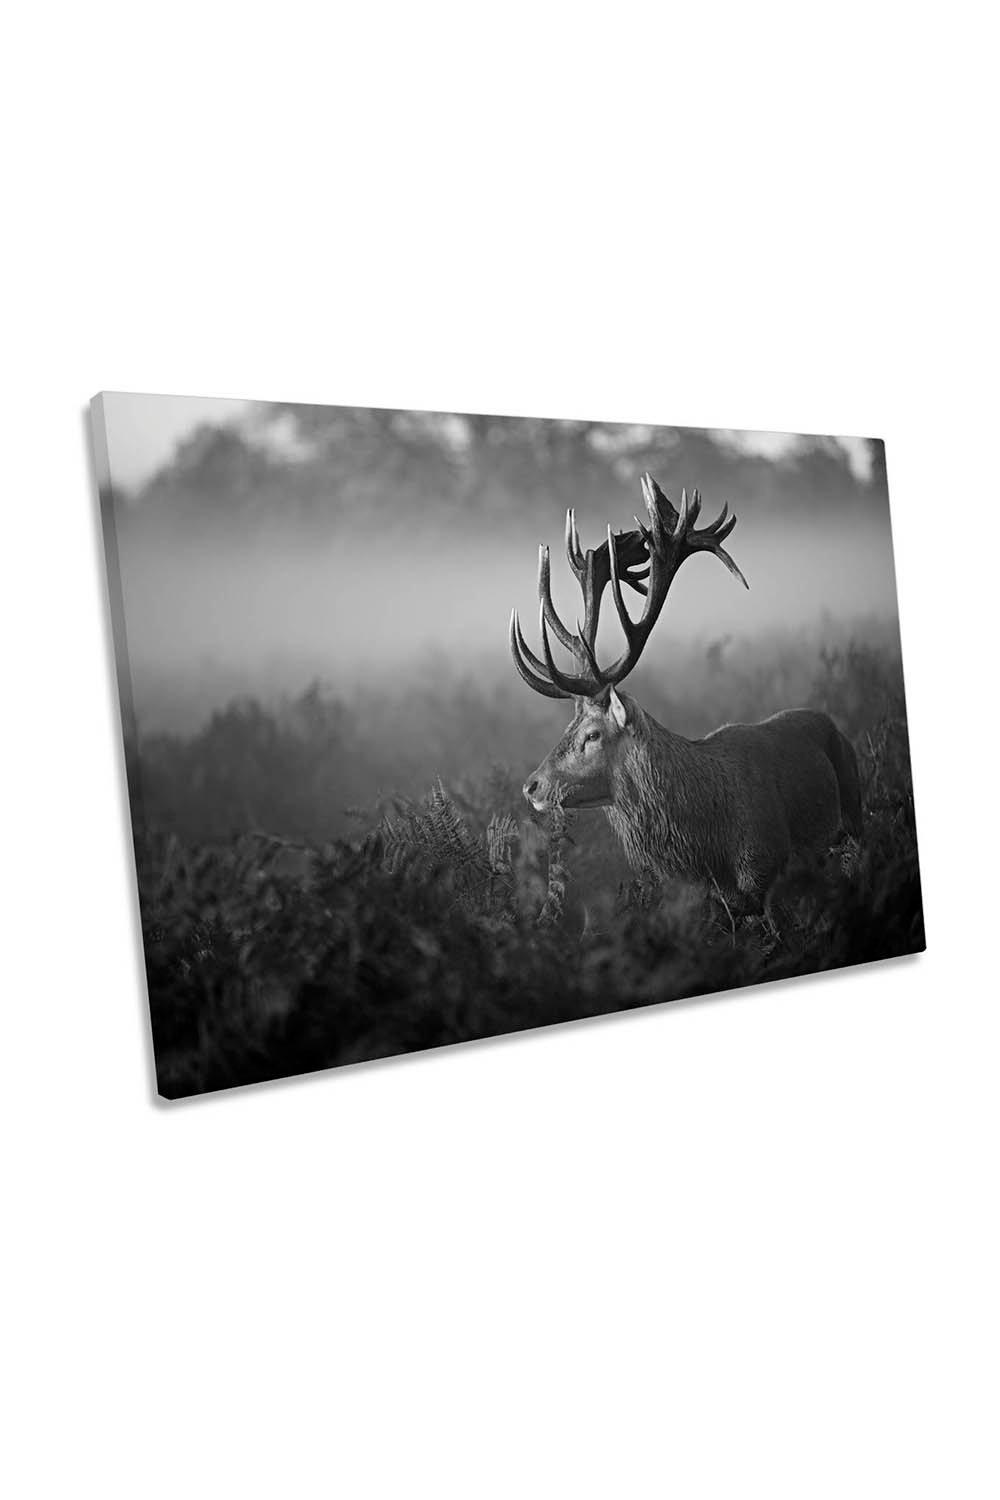 Stag Antlers Deer Black and White Canvas Wall Art Picture Print